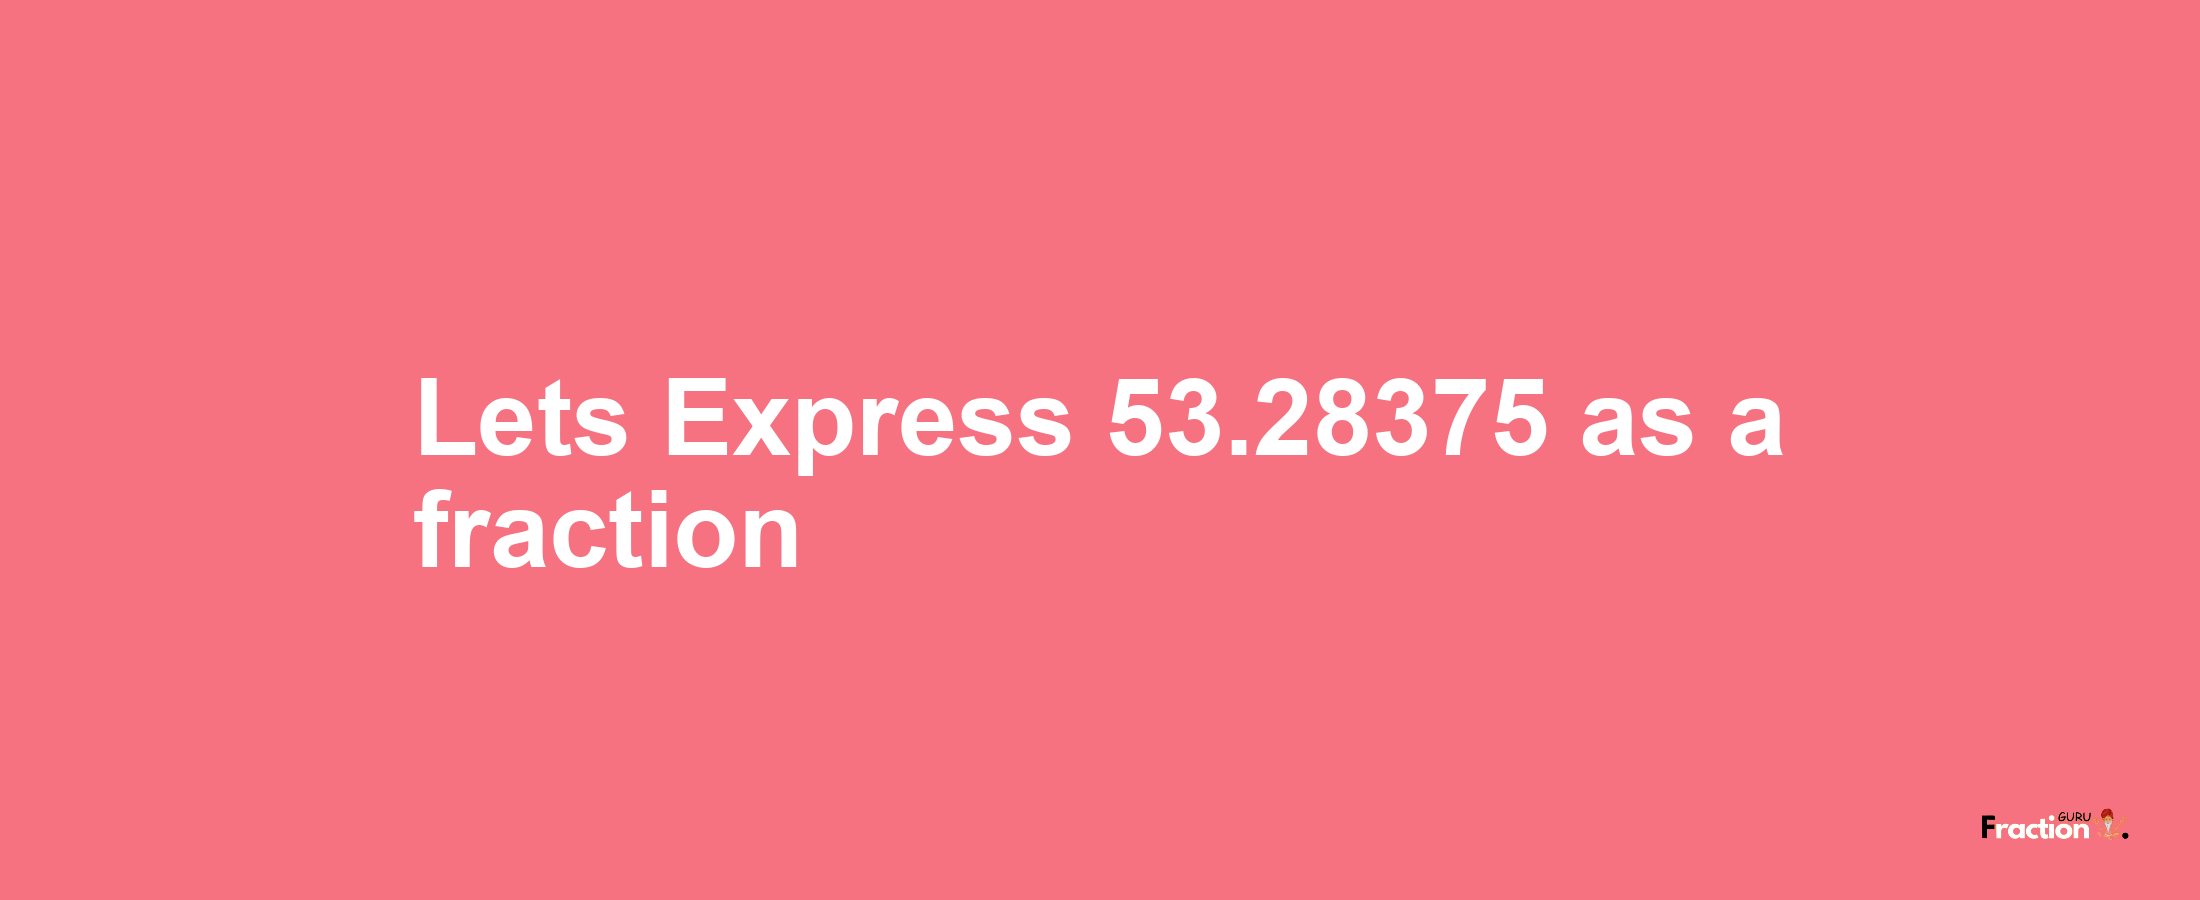 Lets Express 53.28375 as afraction